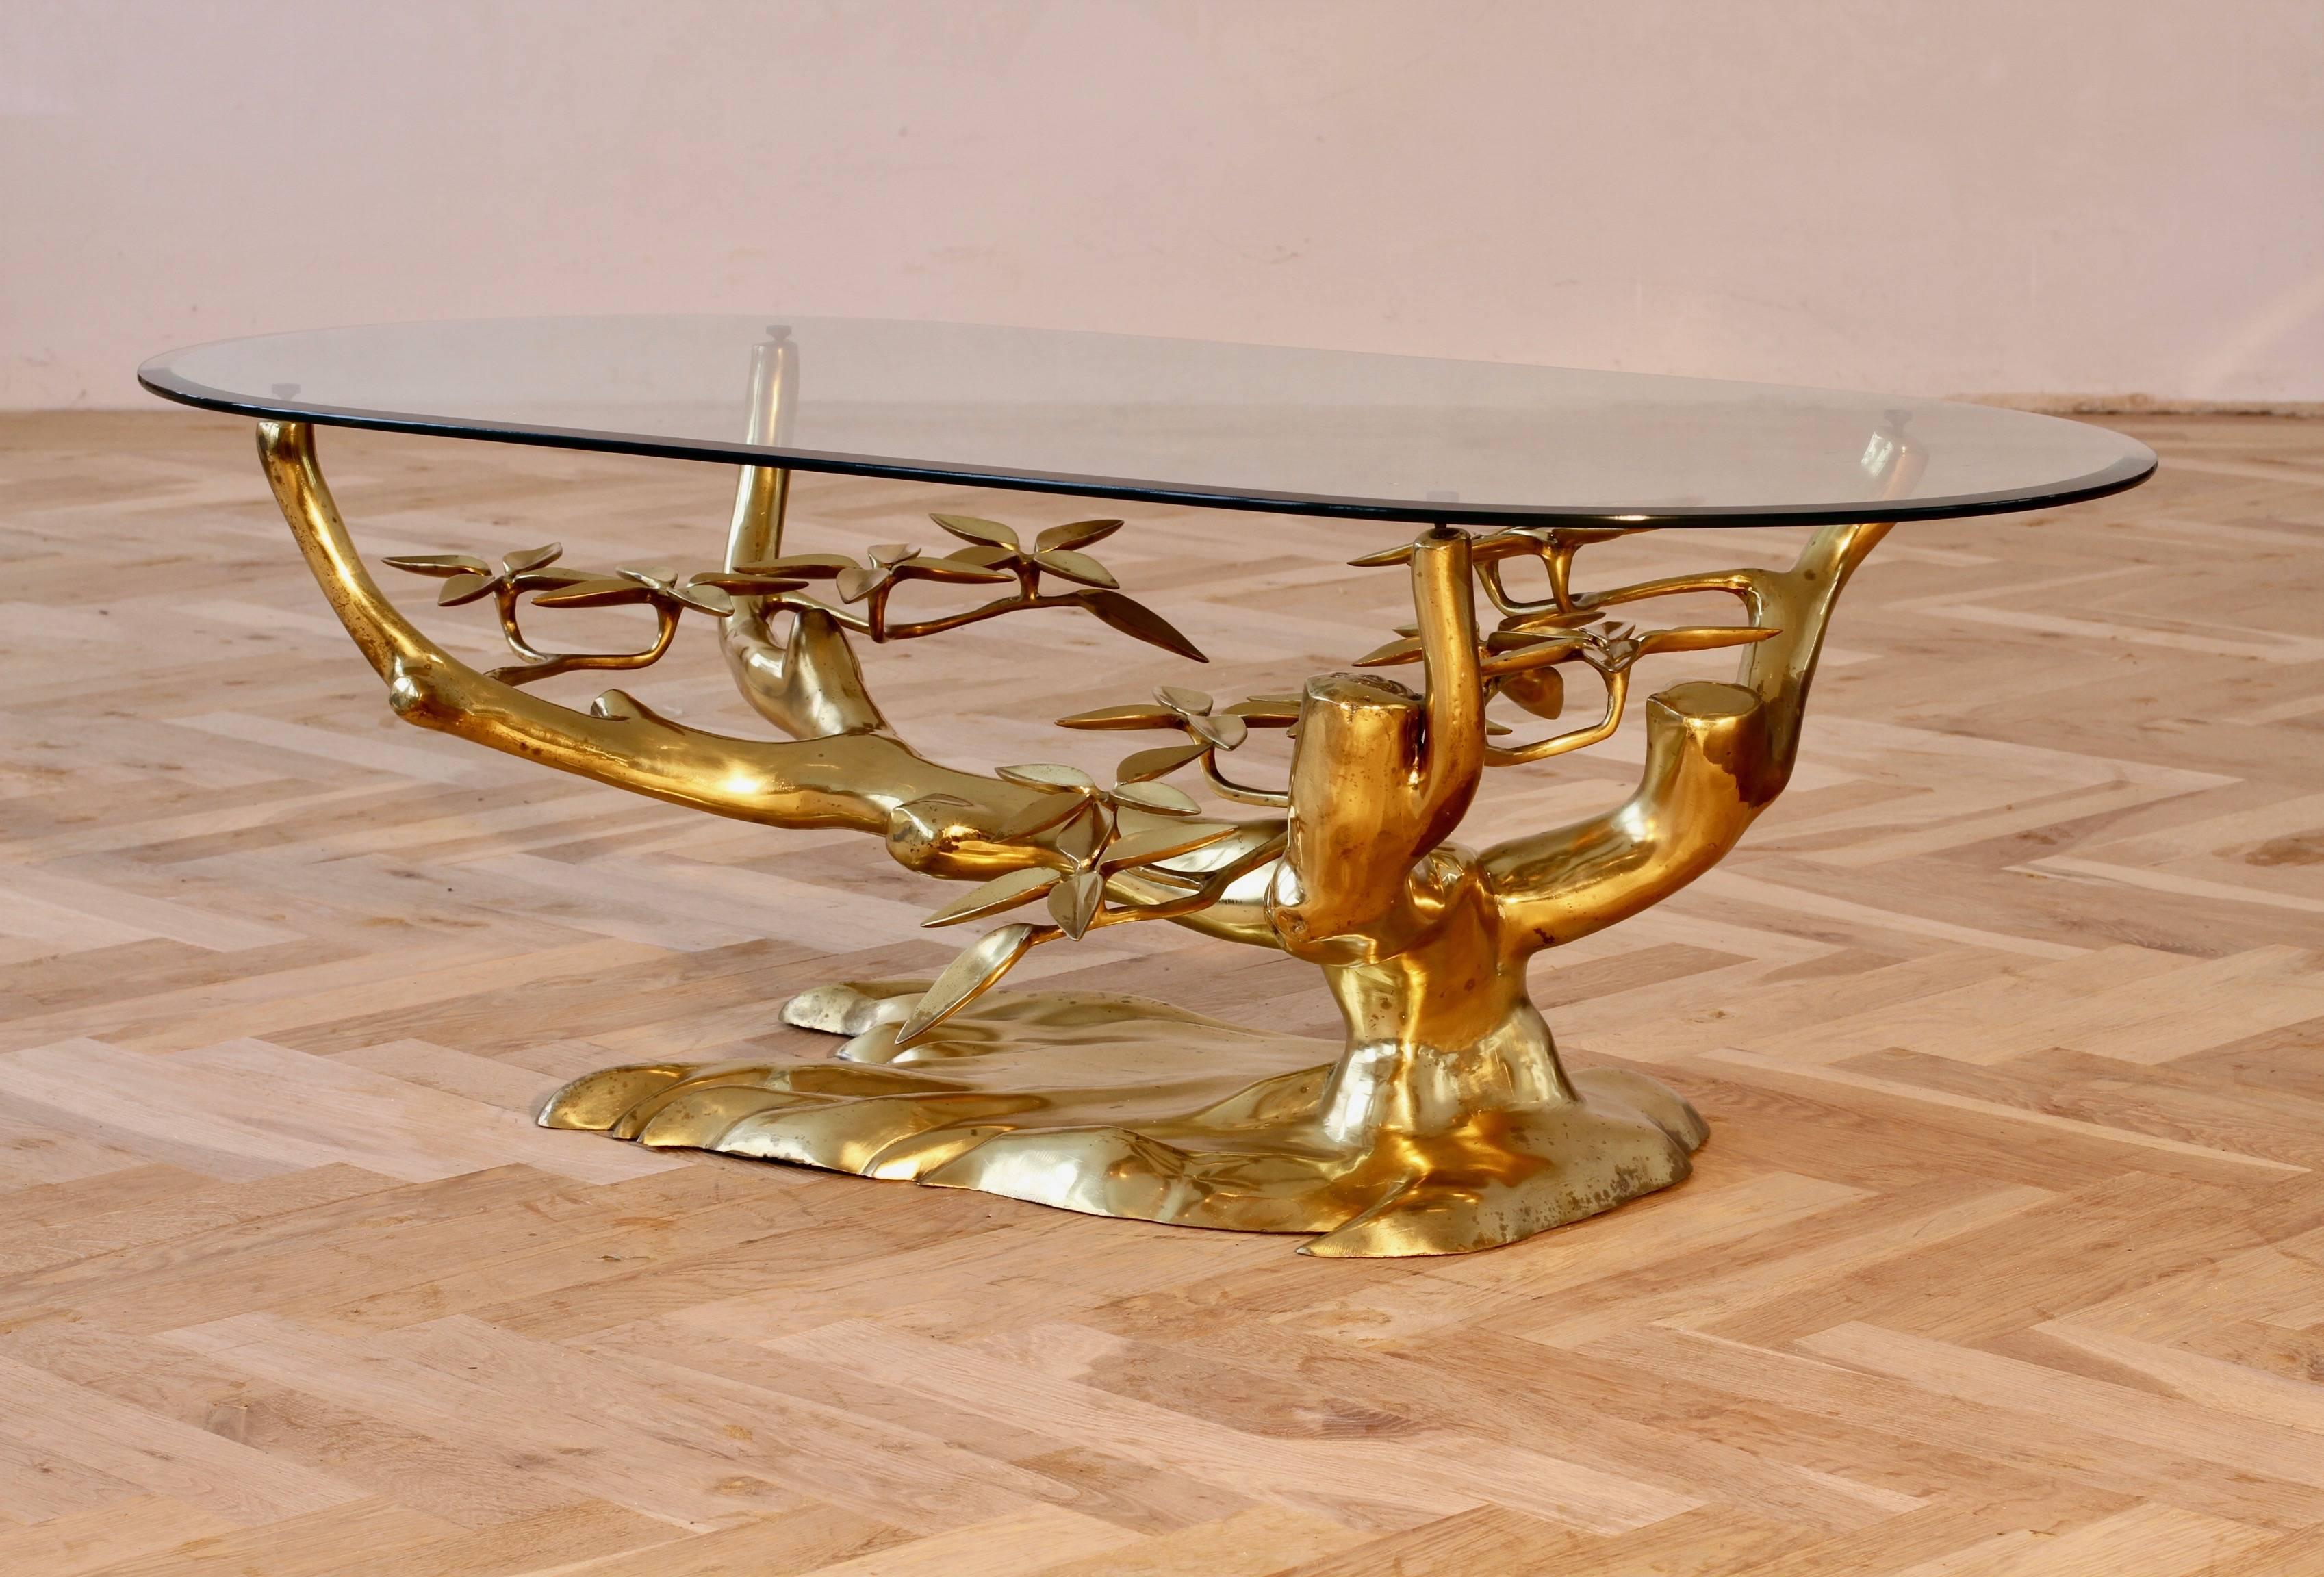 This wonderful and whimsical Willy Daro inspired table, cast in brass, takes on the form of a 'Bonsai' tree with the very stylised flower petals, while the brass branches hold a beveled edged glass table top. 

Produced in Belgium, circa 1970, this